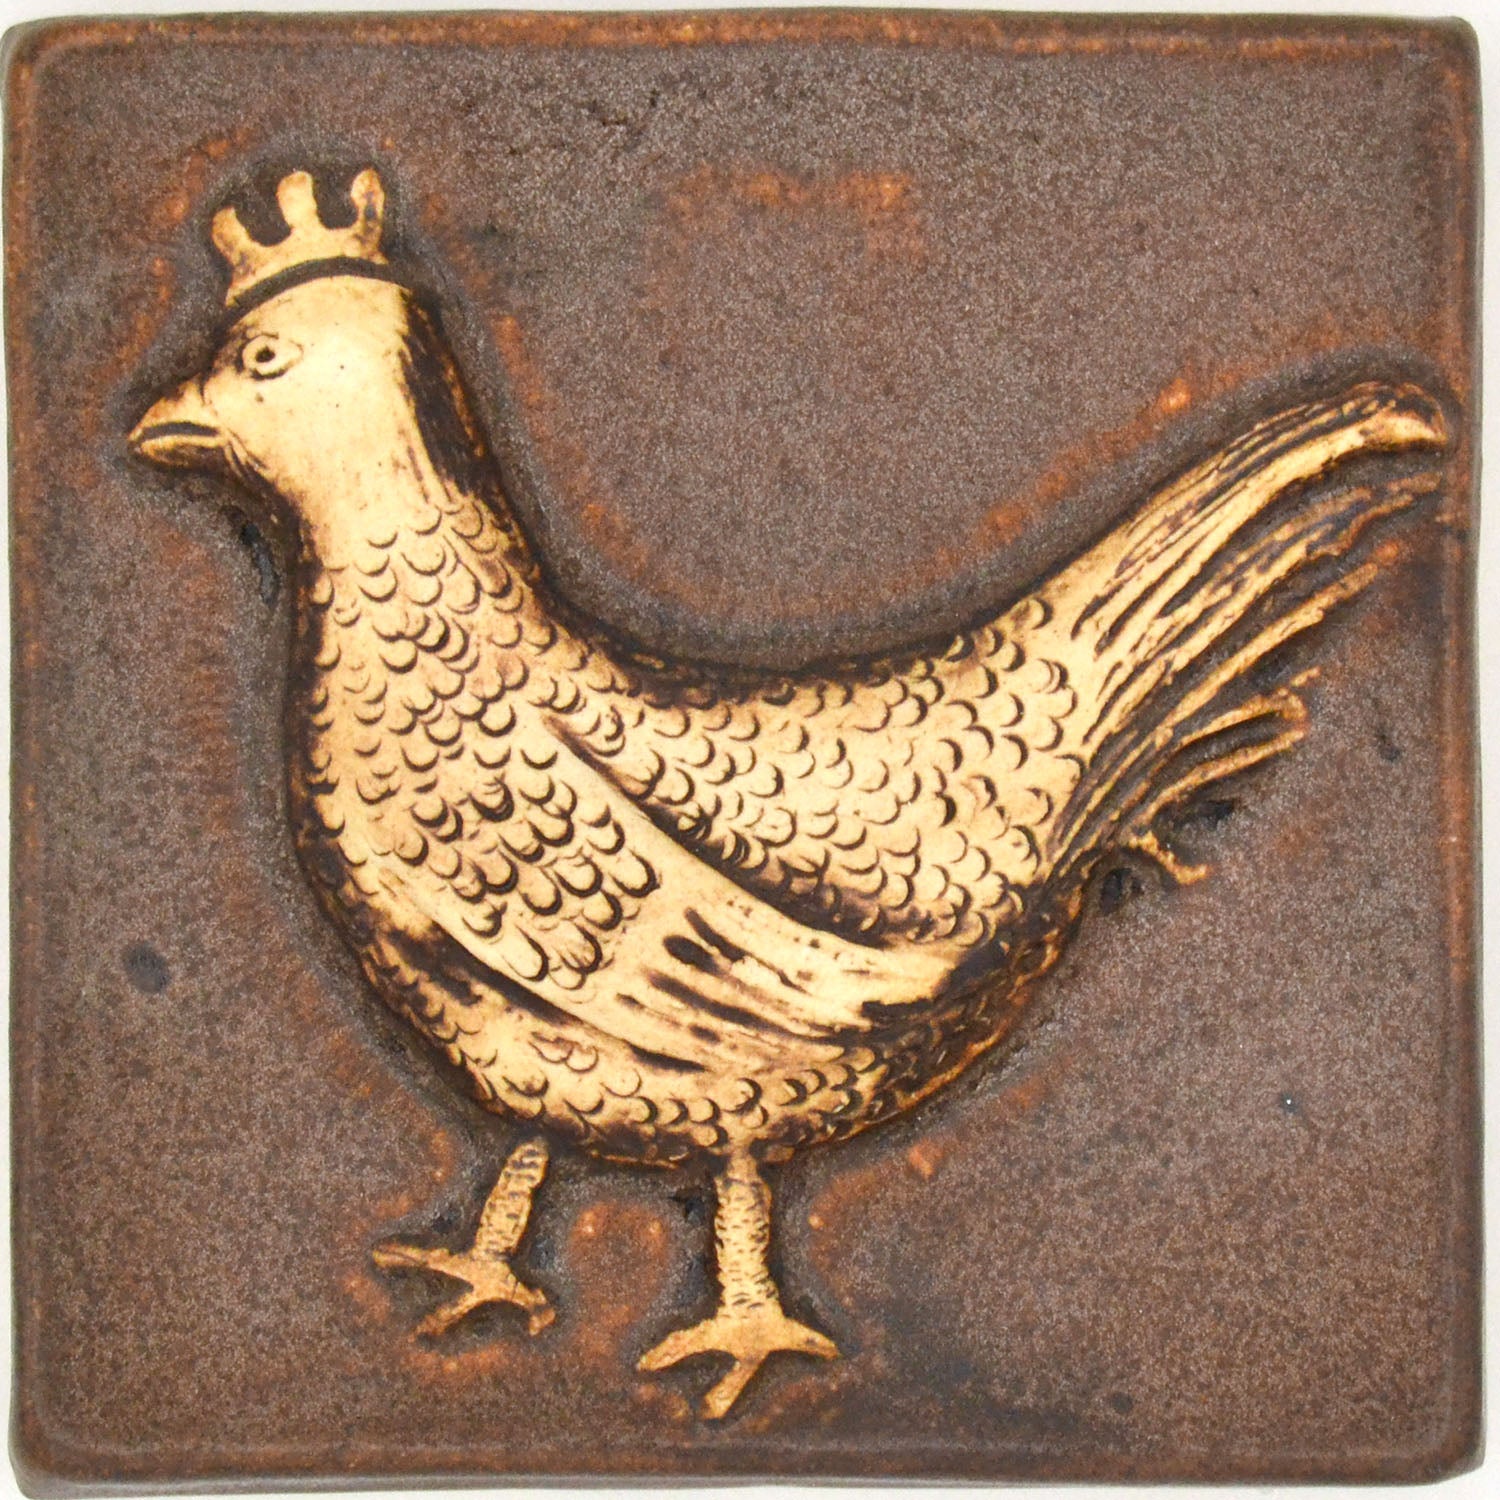 4x4 chicken tile in brown